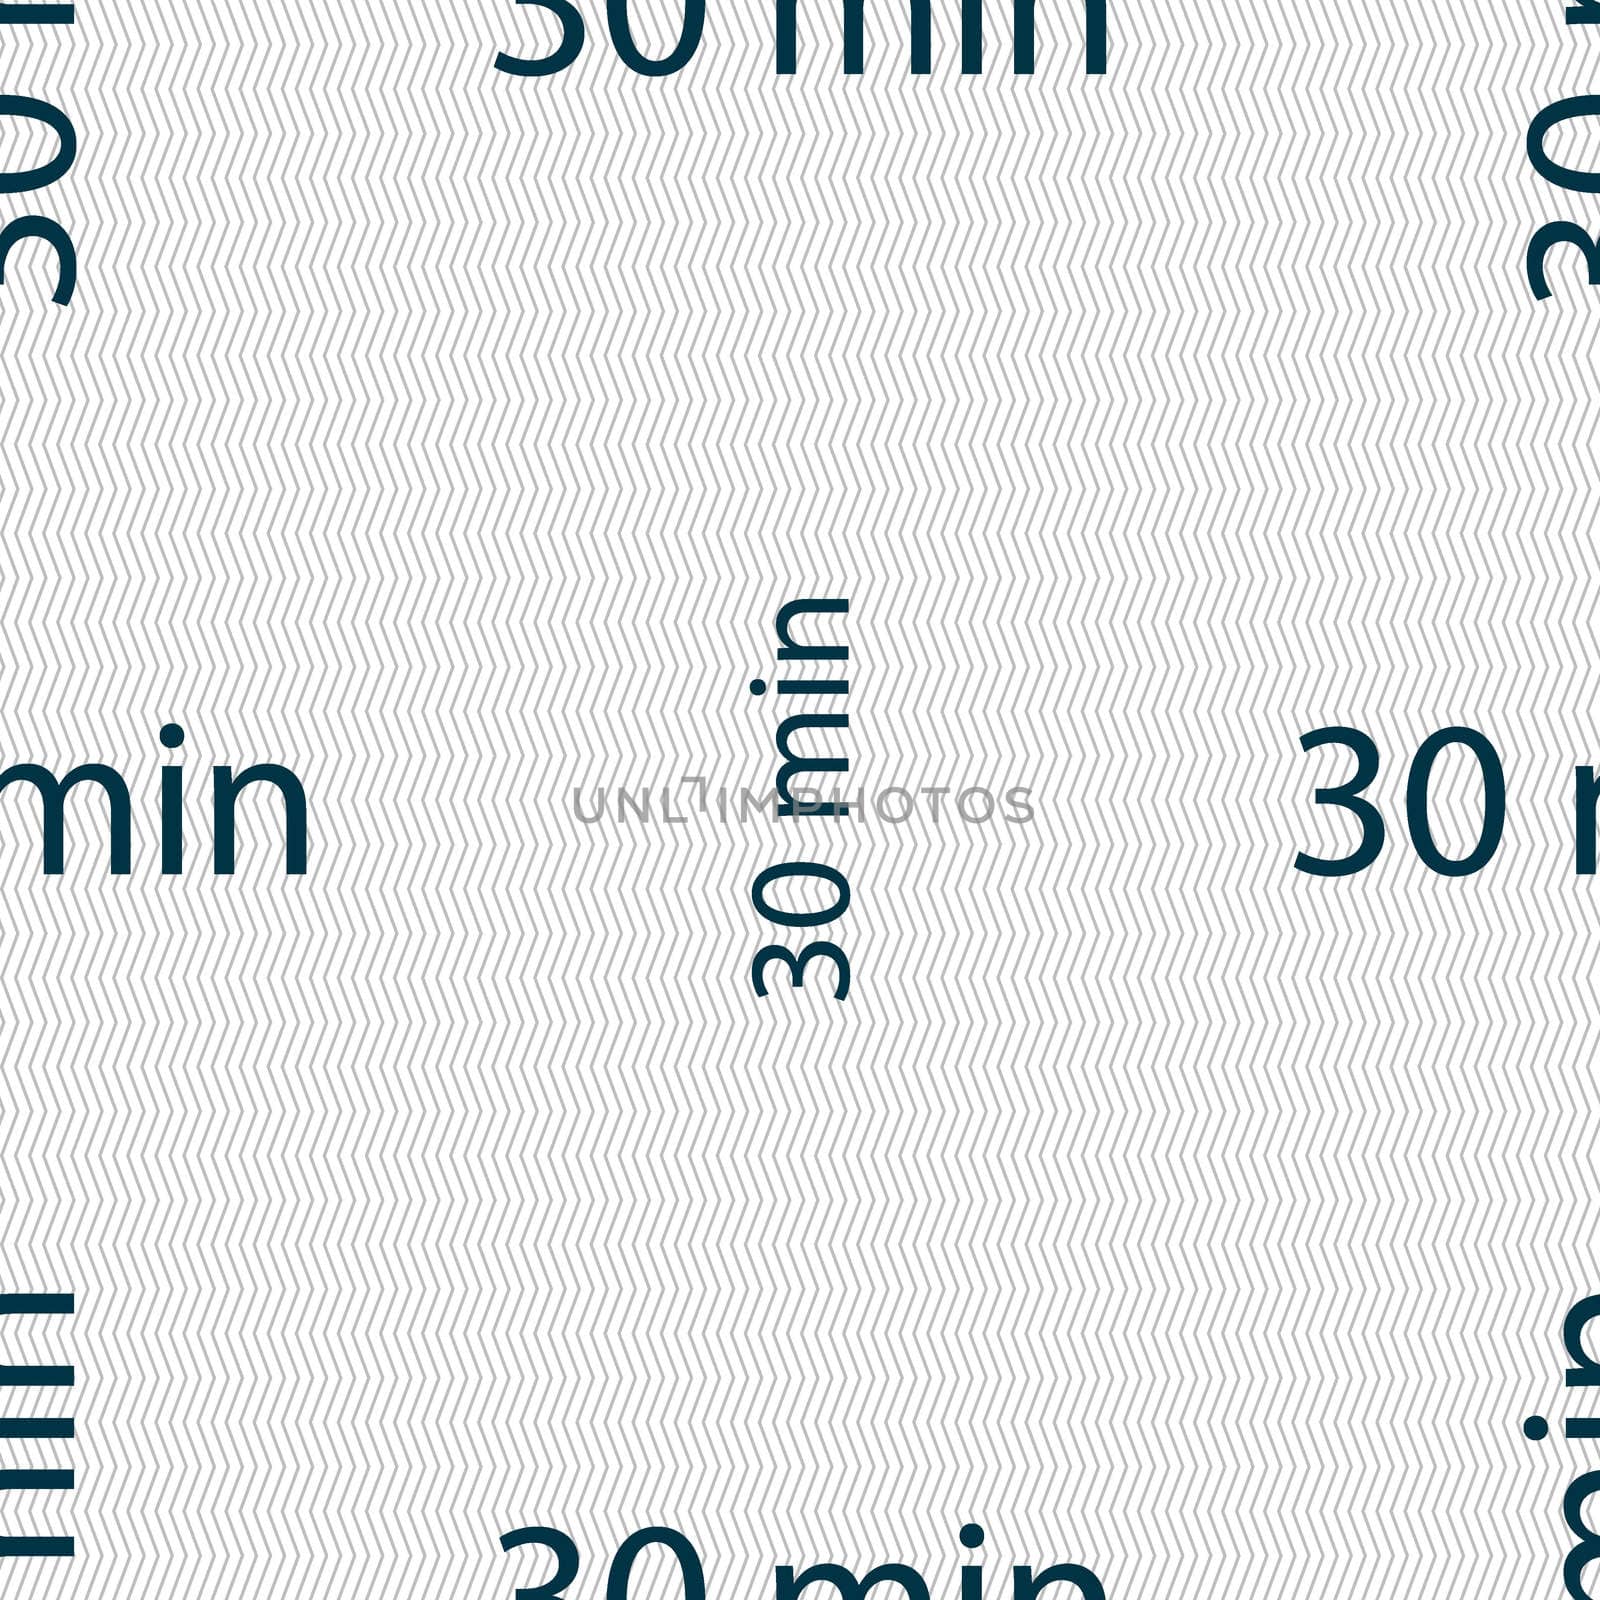 30 minutes sign icon. Seamless abstract background with geometric shapes. illustration